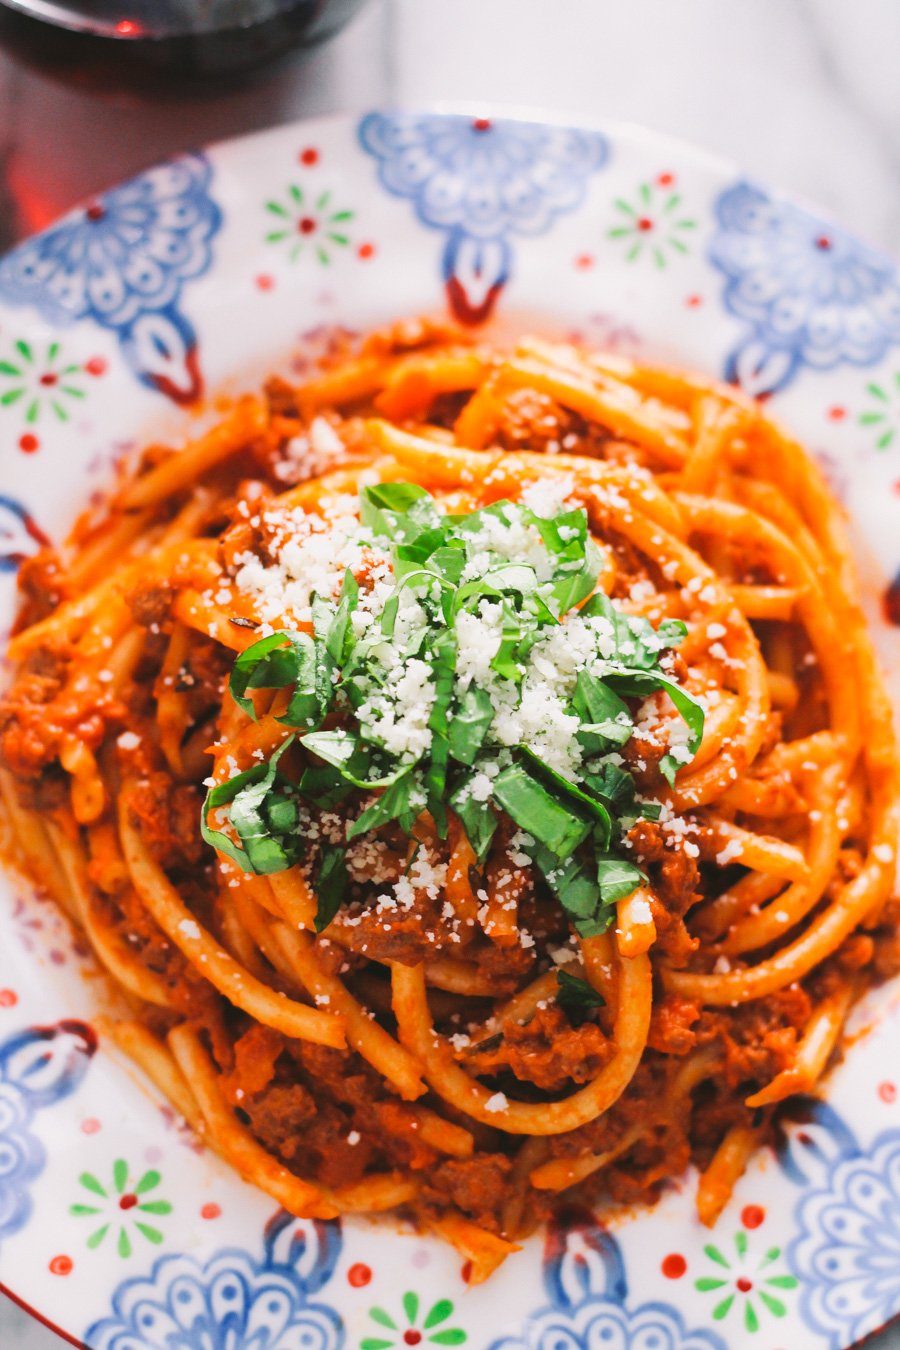 pasta bolognese with bucatini via playswellwithbutter | classic italian comfort food lightened up as a "fauxlognese" by using ground turkey & tons of veggies without compromising any of the flavor! bring an authentic taste of italy into your home with zero guilt!